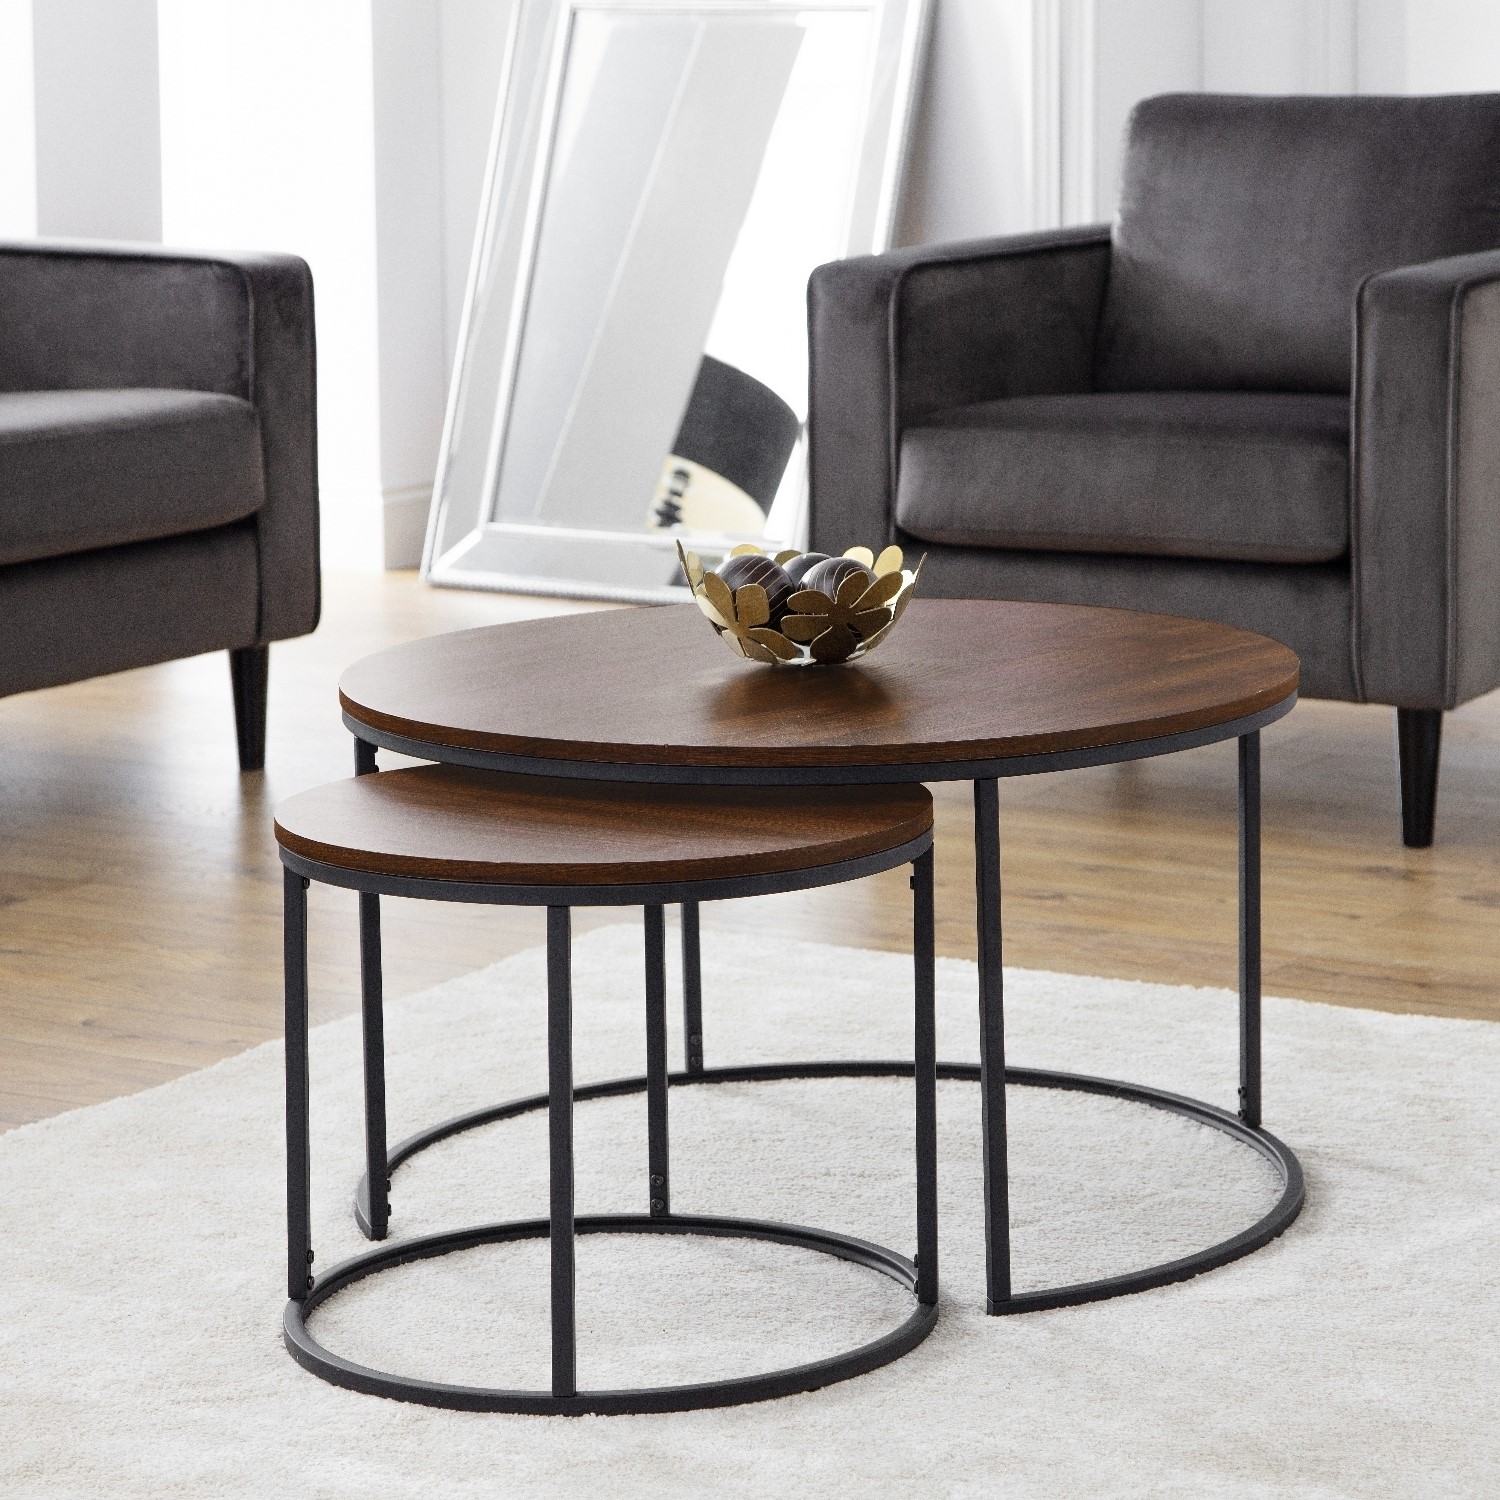 Round Dark Wood Nest Of Coffee Tables, Round Wood Side Tables Uk